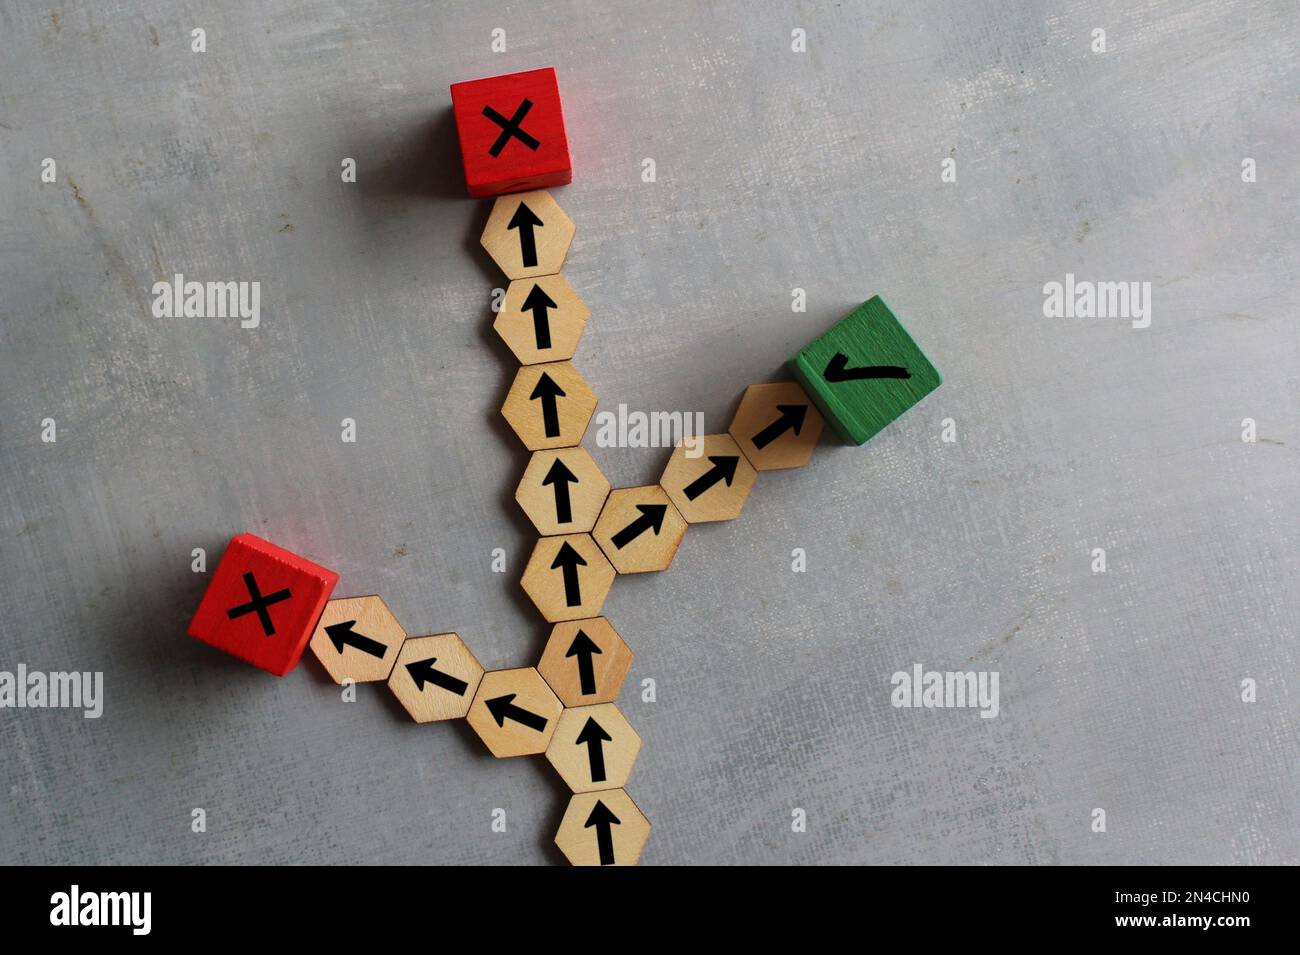 Wooden cubes with arrows, right and wrong icon. Choosing right path, road to success, alternative option concept Stock Photo